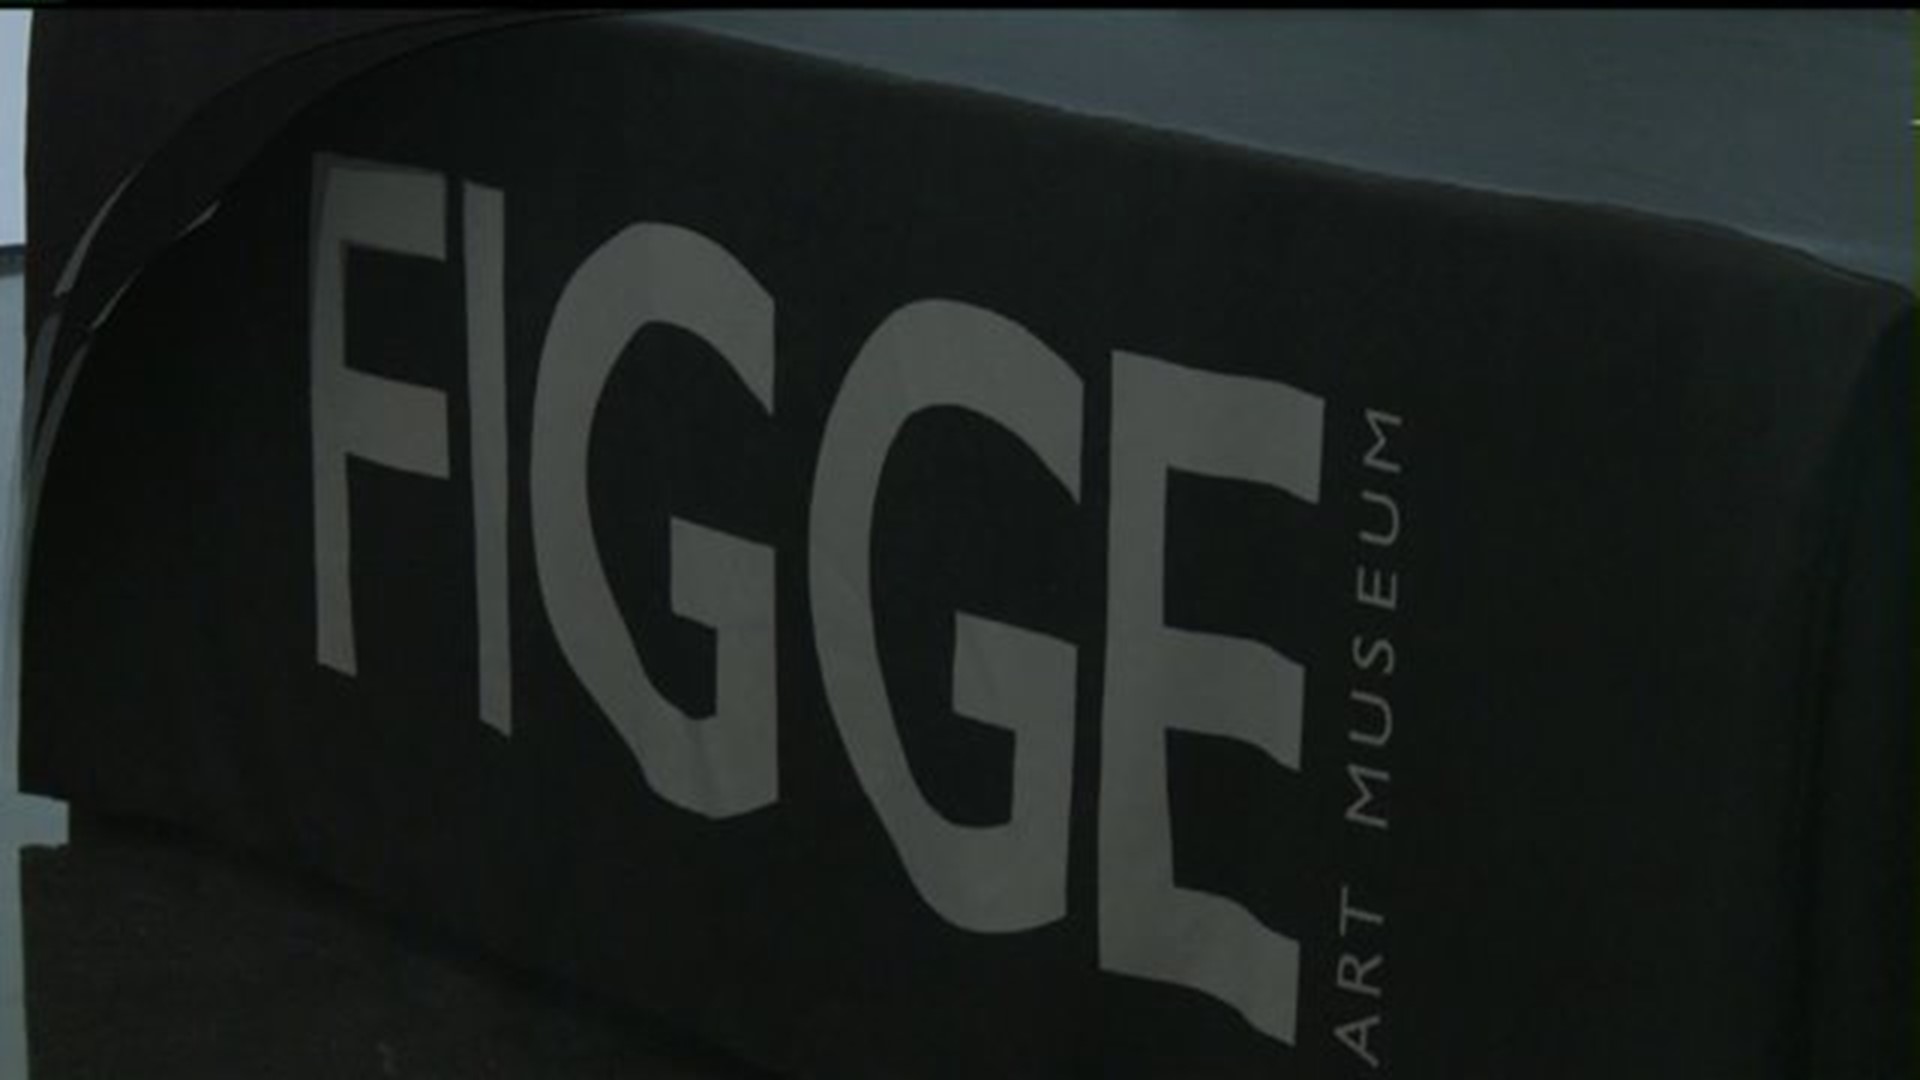 Donation made to the Figge